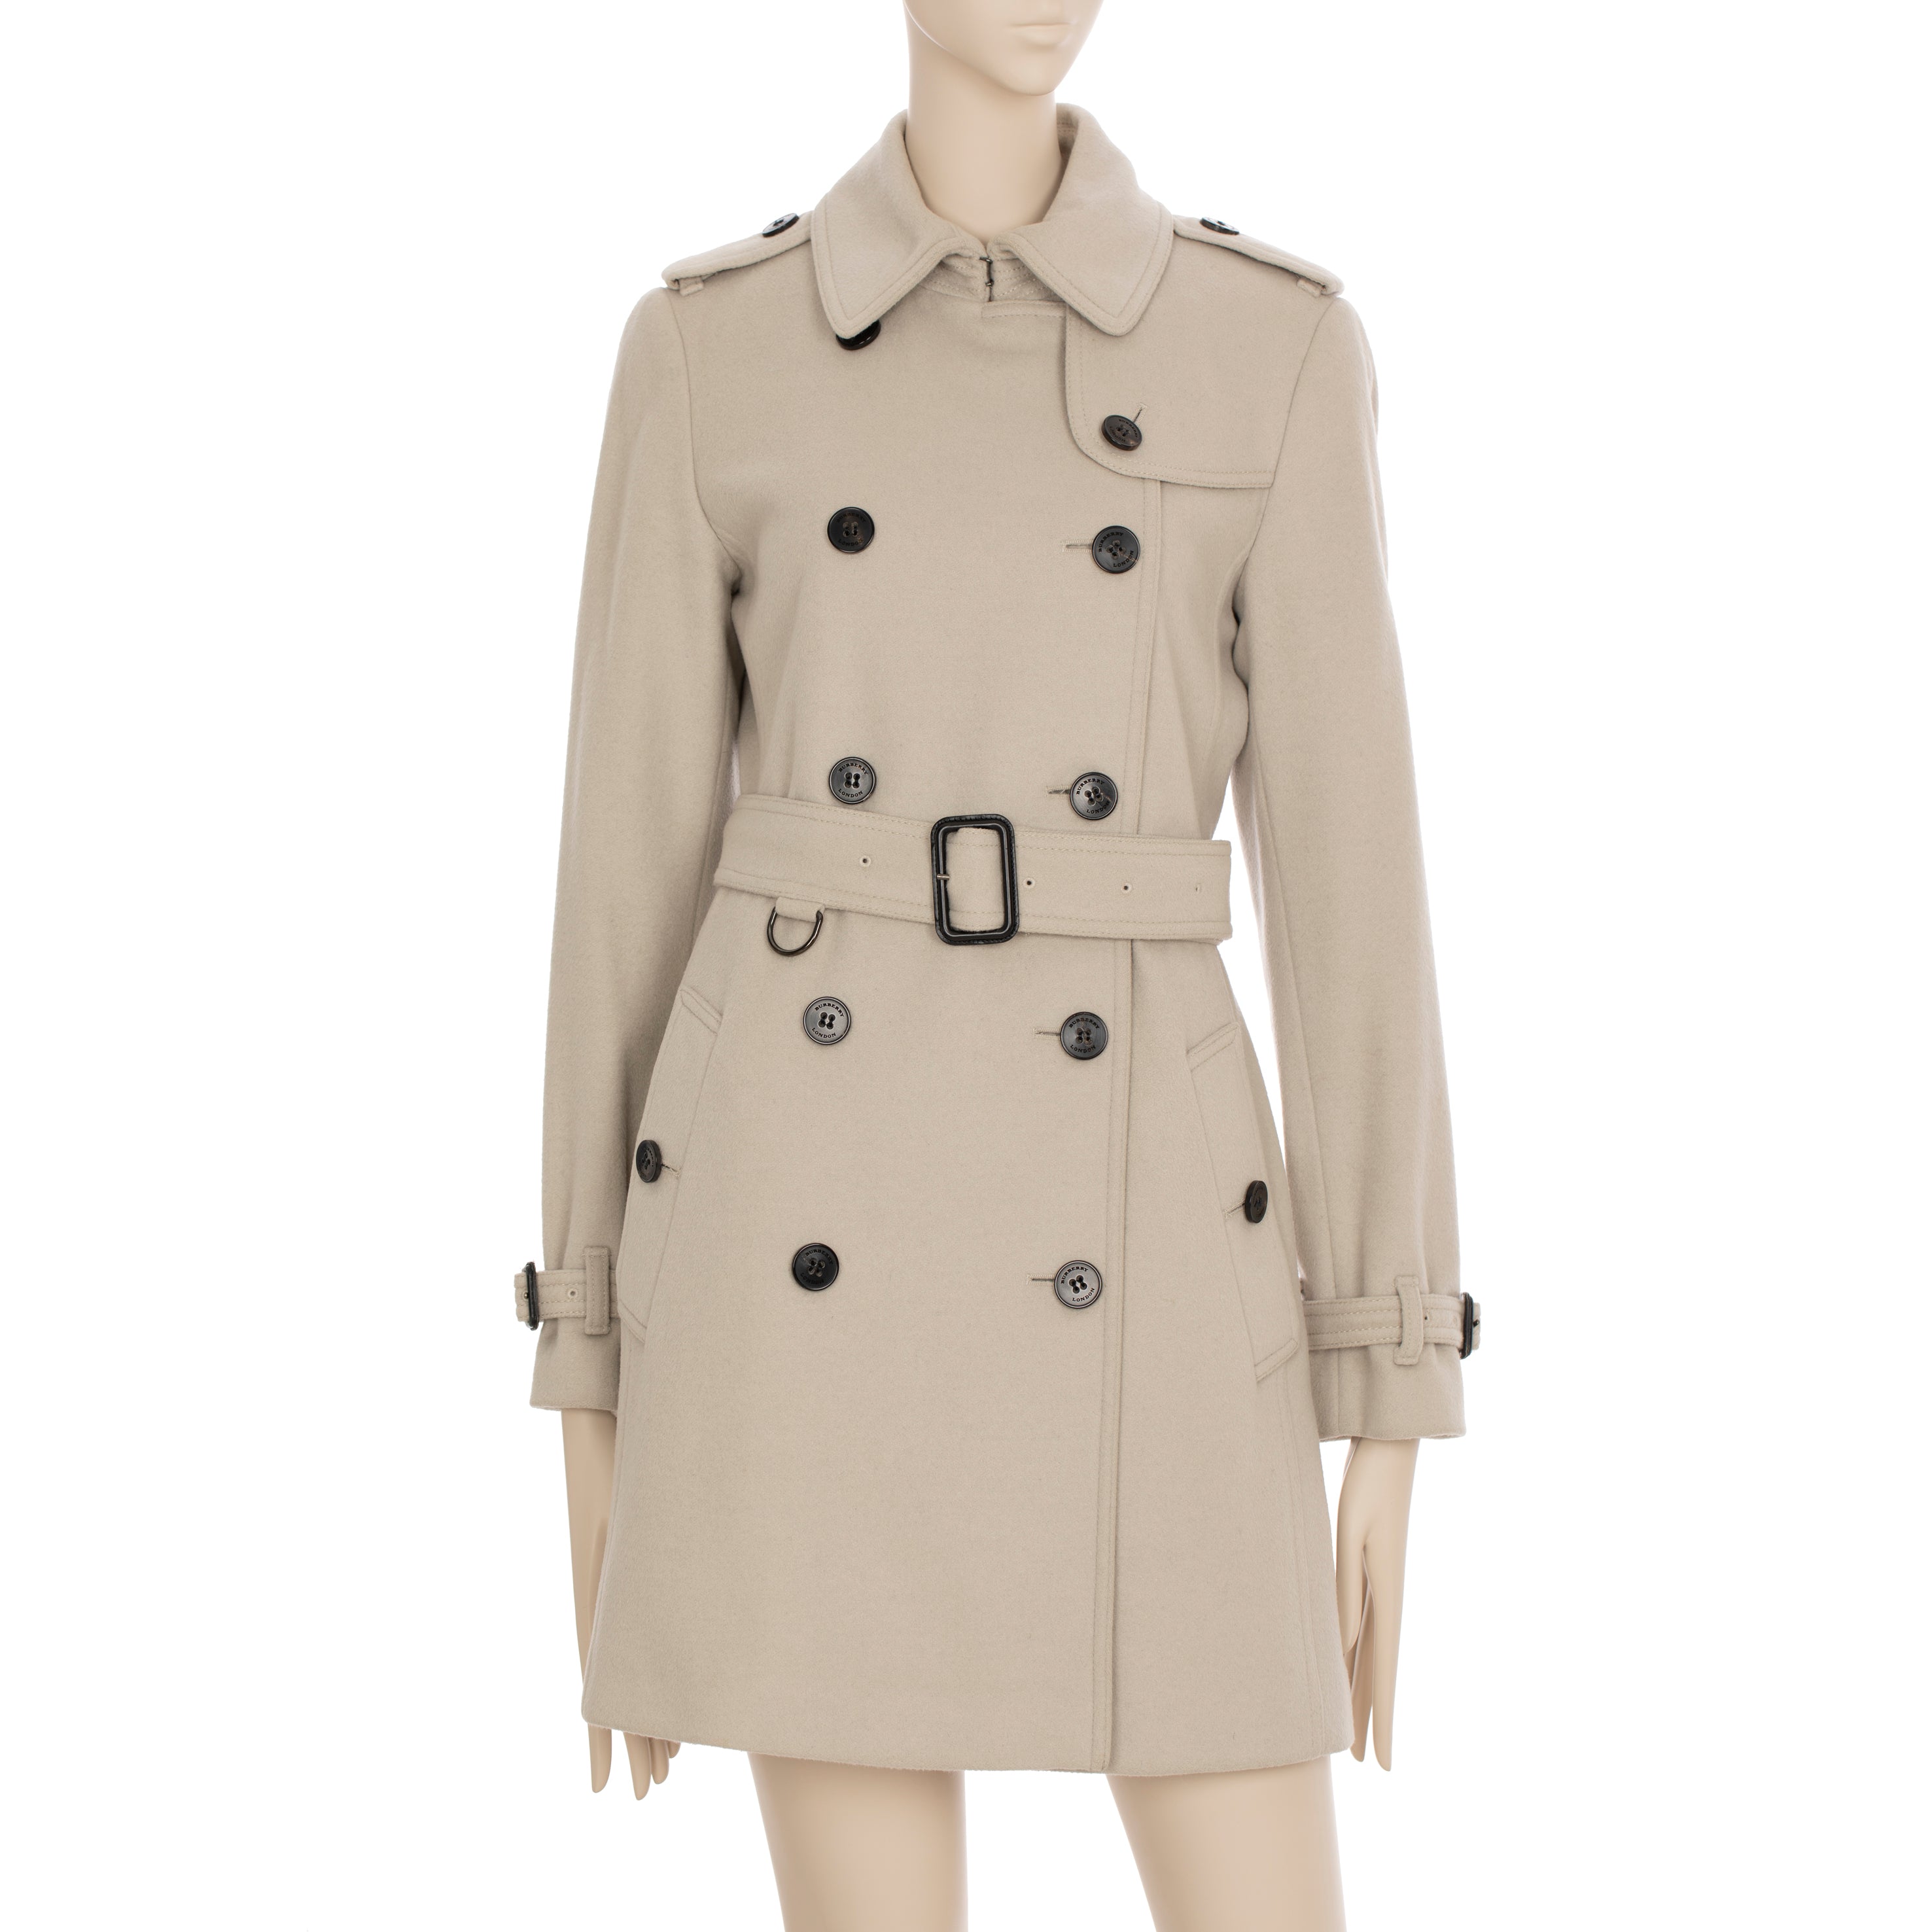 Burberry Beige Wool & Cashmere Trench Coat 38 IT